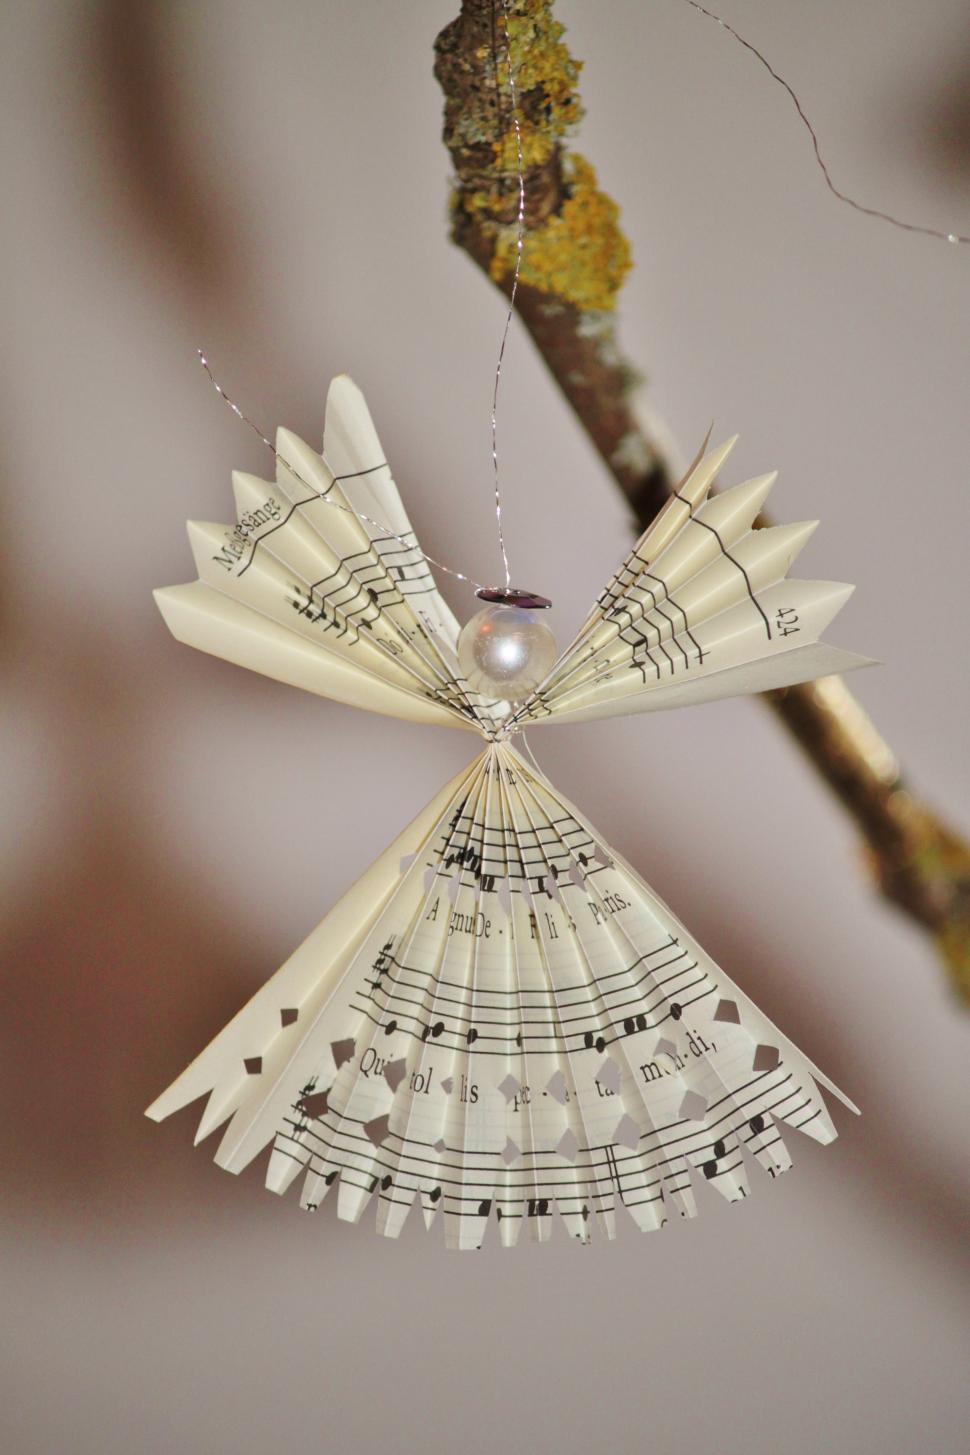 Free Image of Paper Angel Ornament Hanging From Tree Branch 